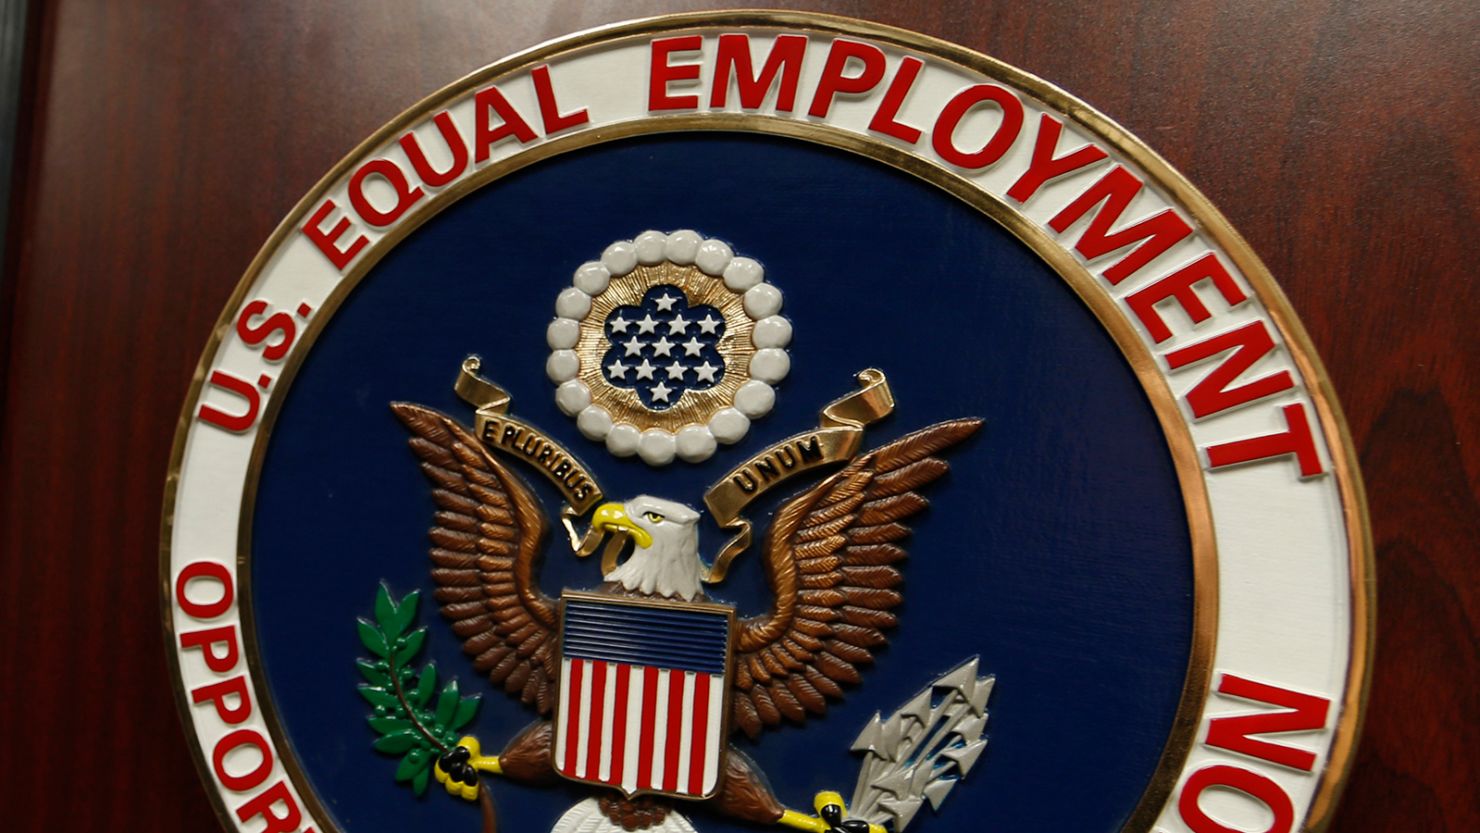 The emblem of the US Equal Employment Opportunity Commission is shown on a podium in Denver, Colorado, on February 16, 2016.